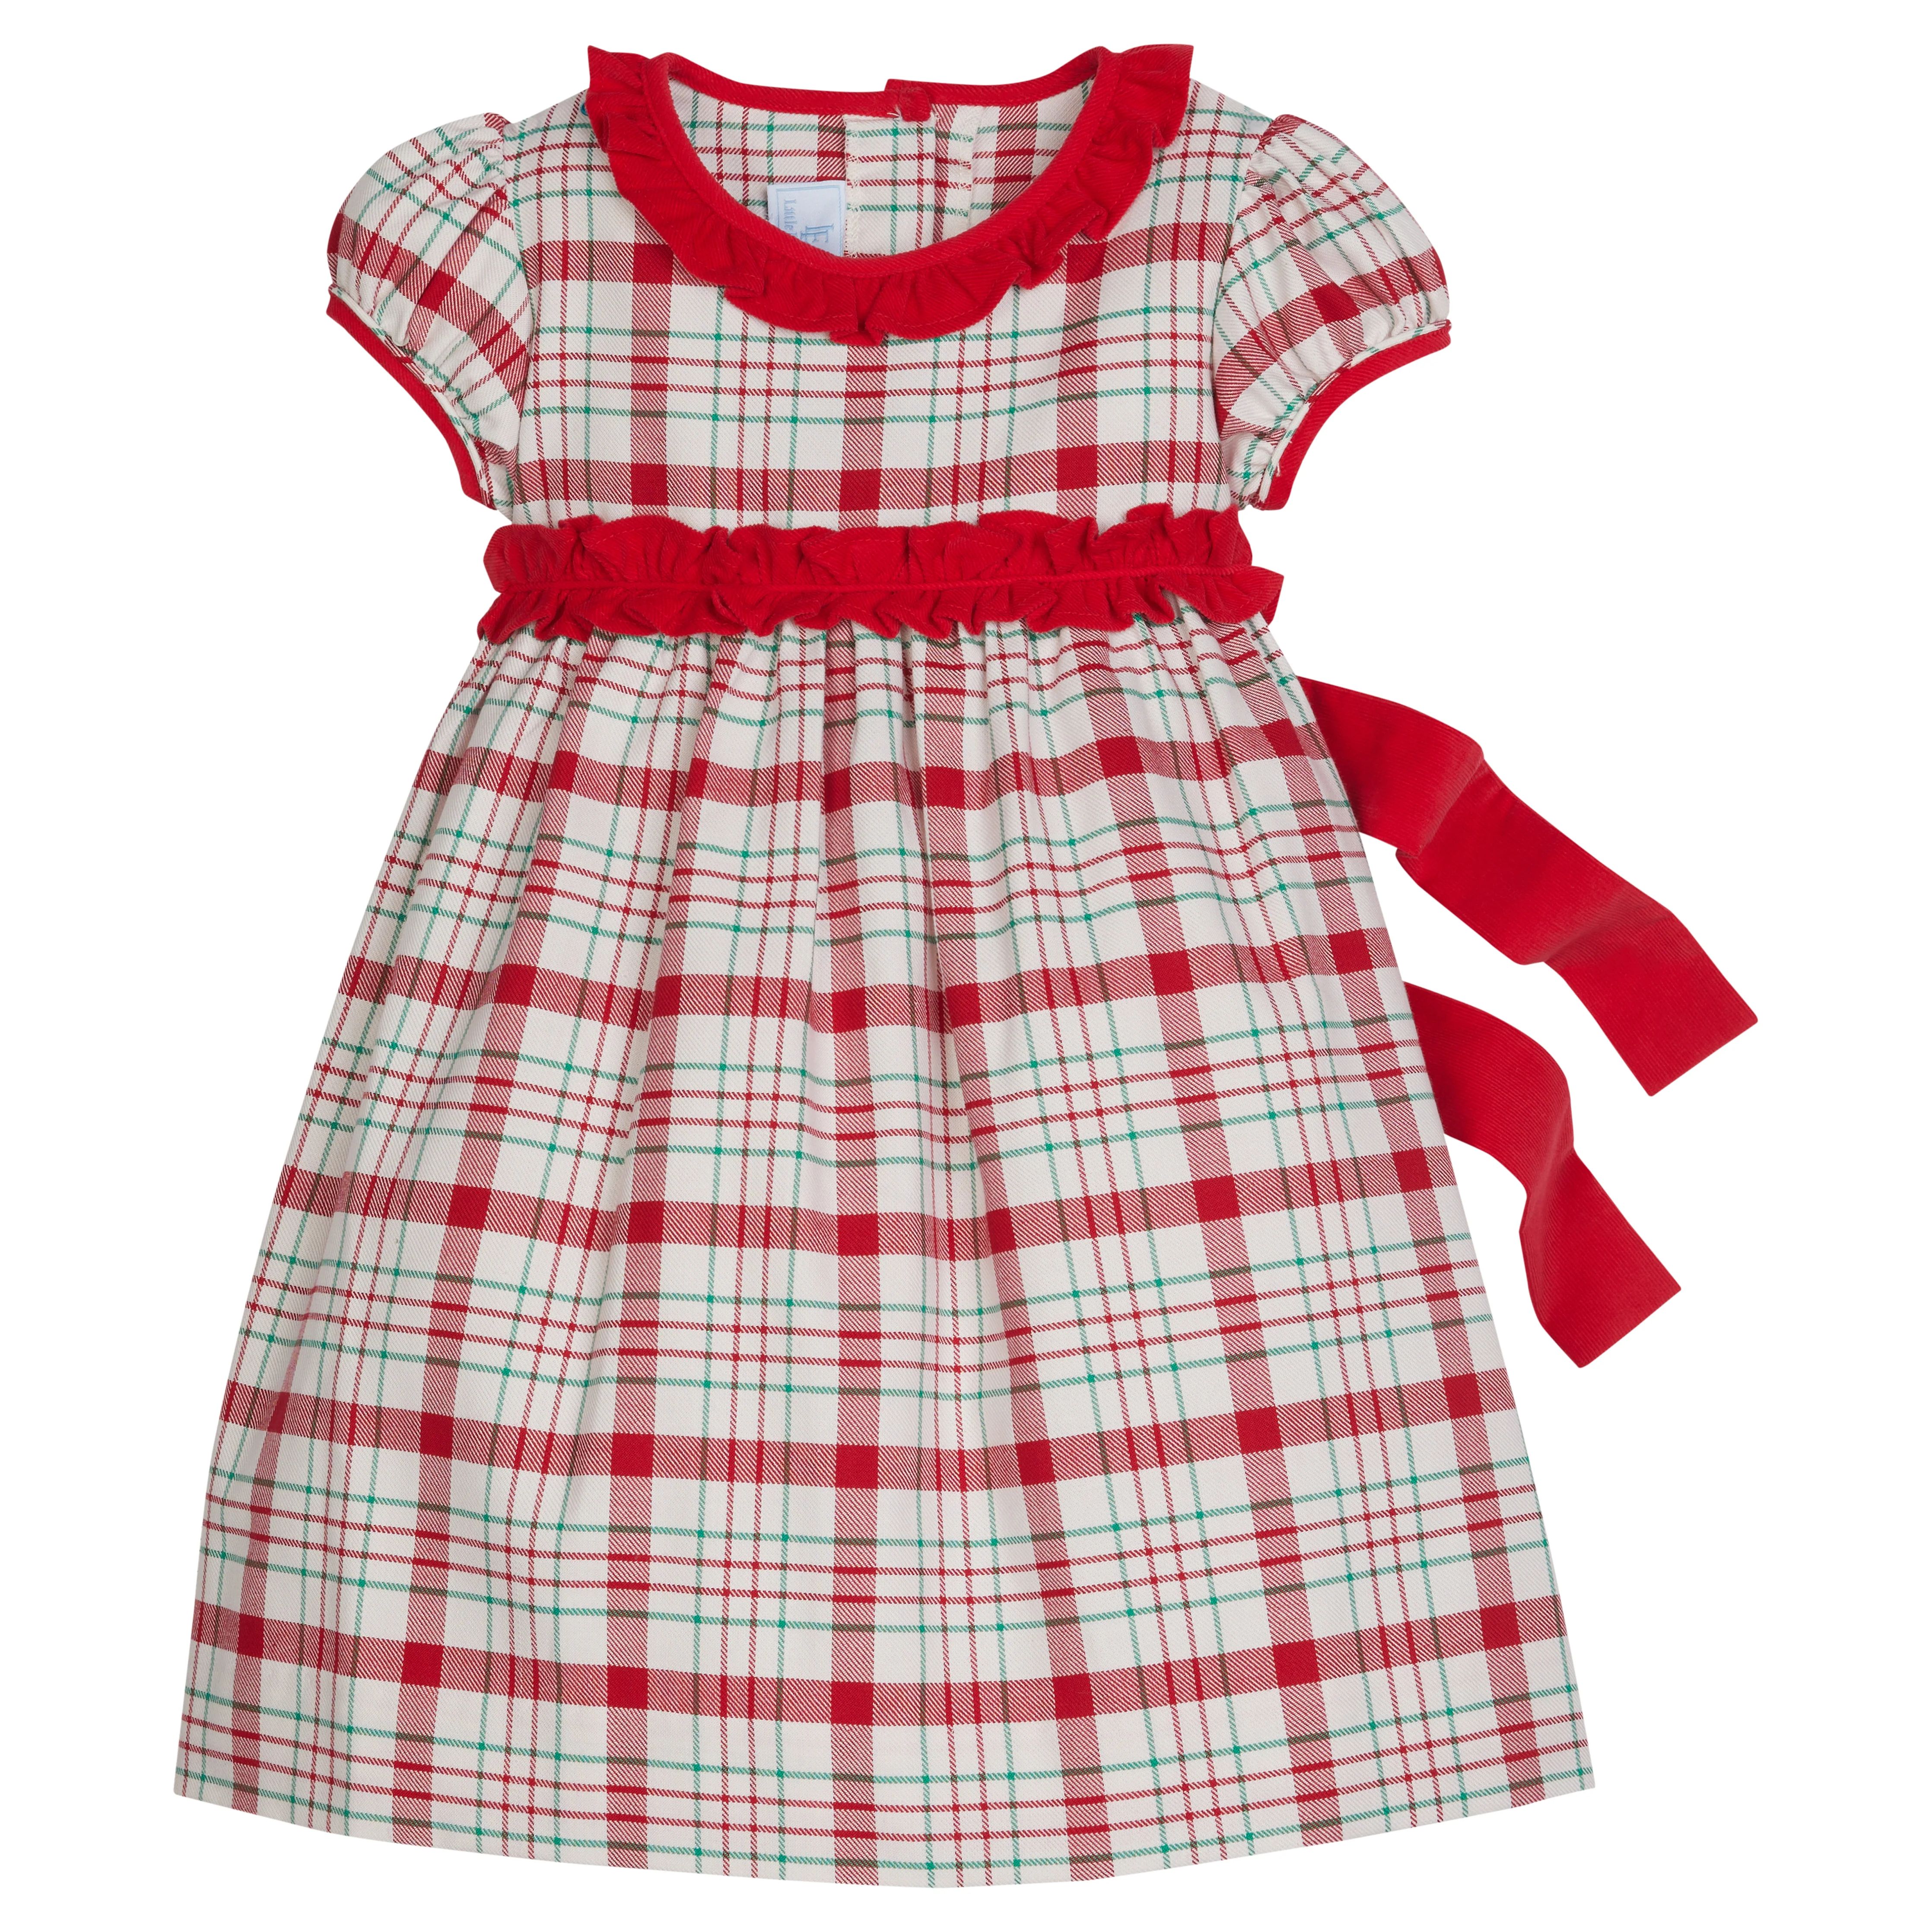 Holiday Plaid Dress - Girl's Outfit with Bow | Little English